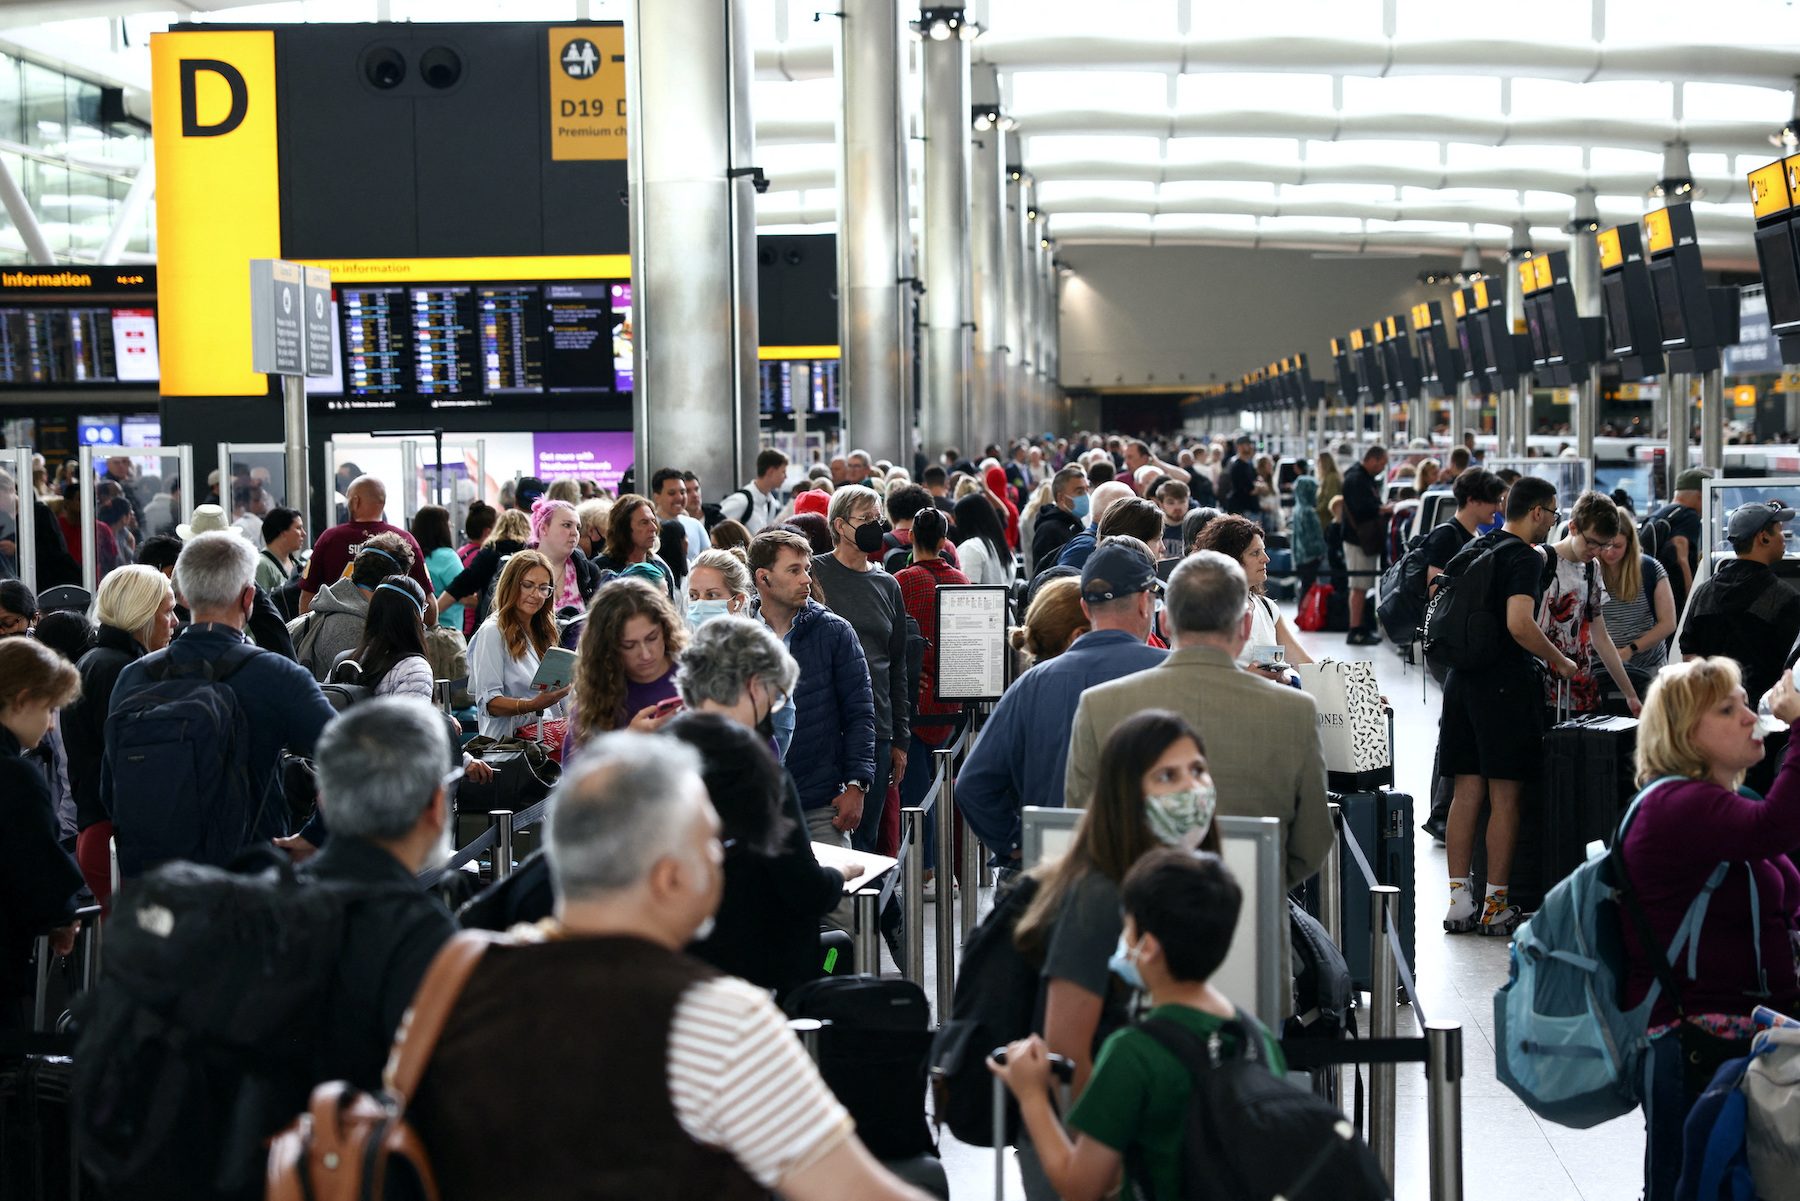 London’s Heathrow caps passengers at 100,000 a day